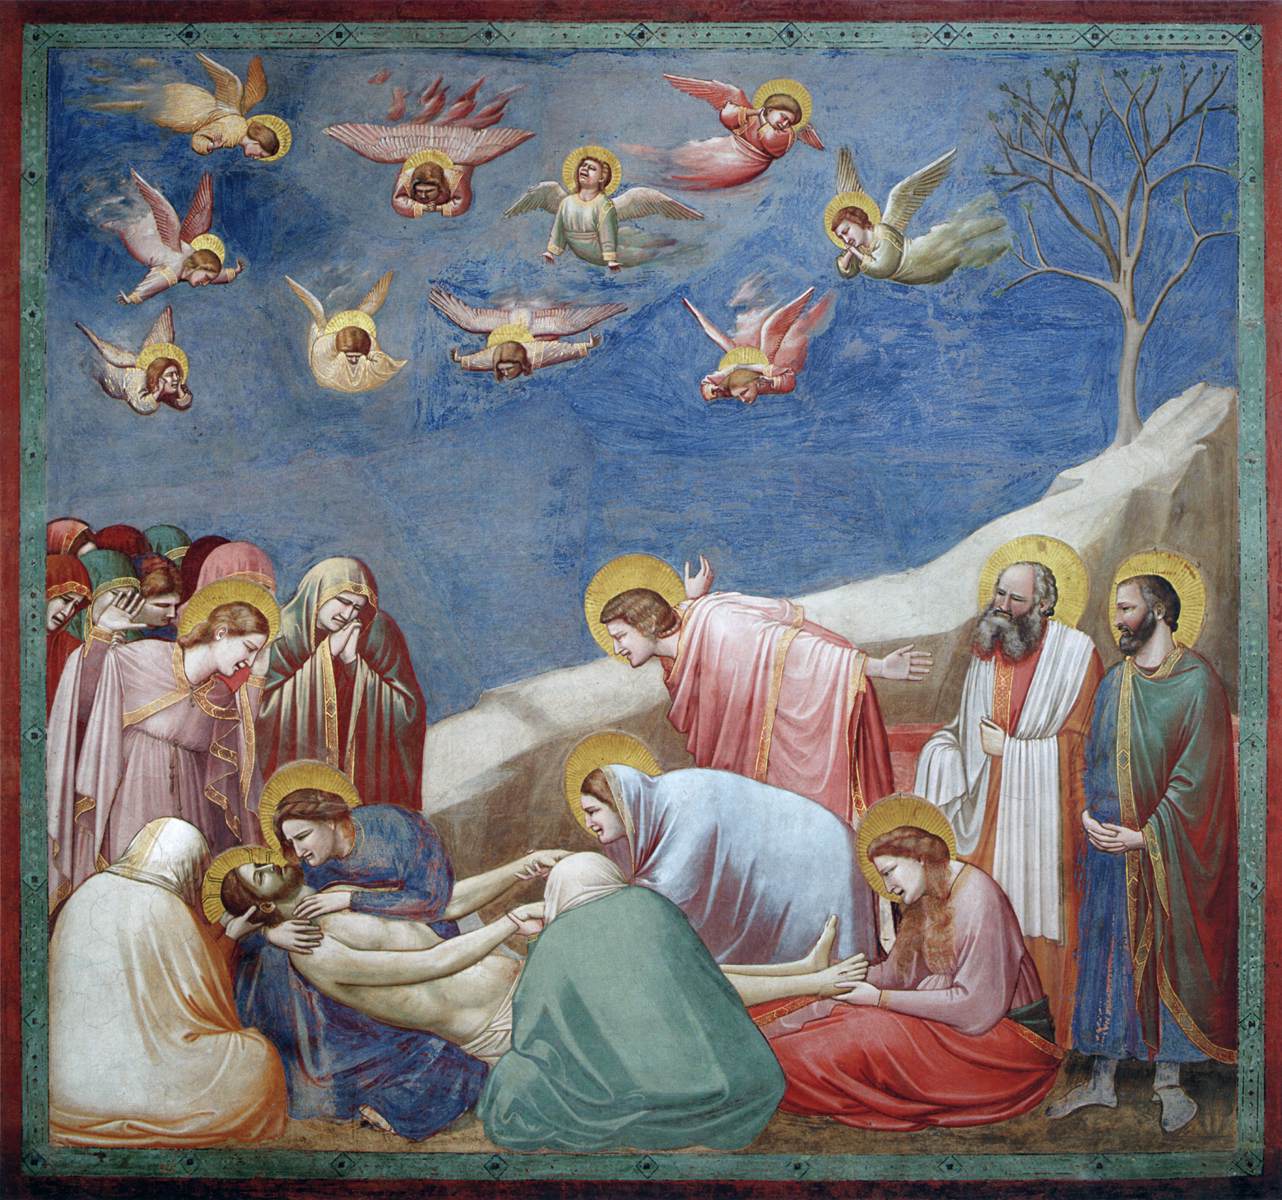 No 36 Scenes from the Life of Christ: 20 Lamentation (The Mourning of Christ)